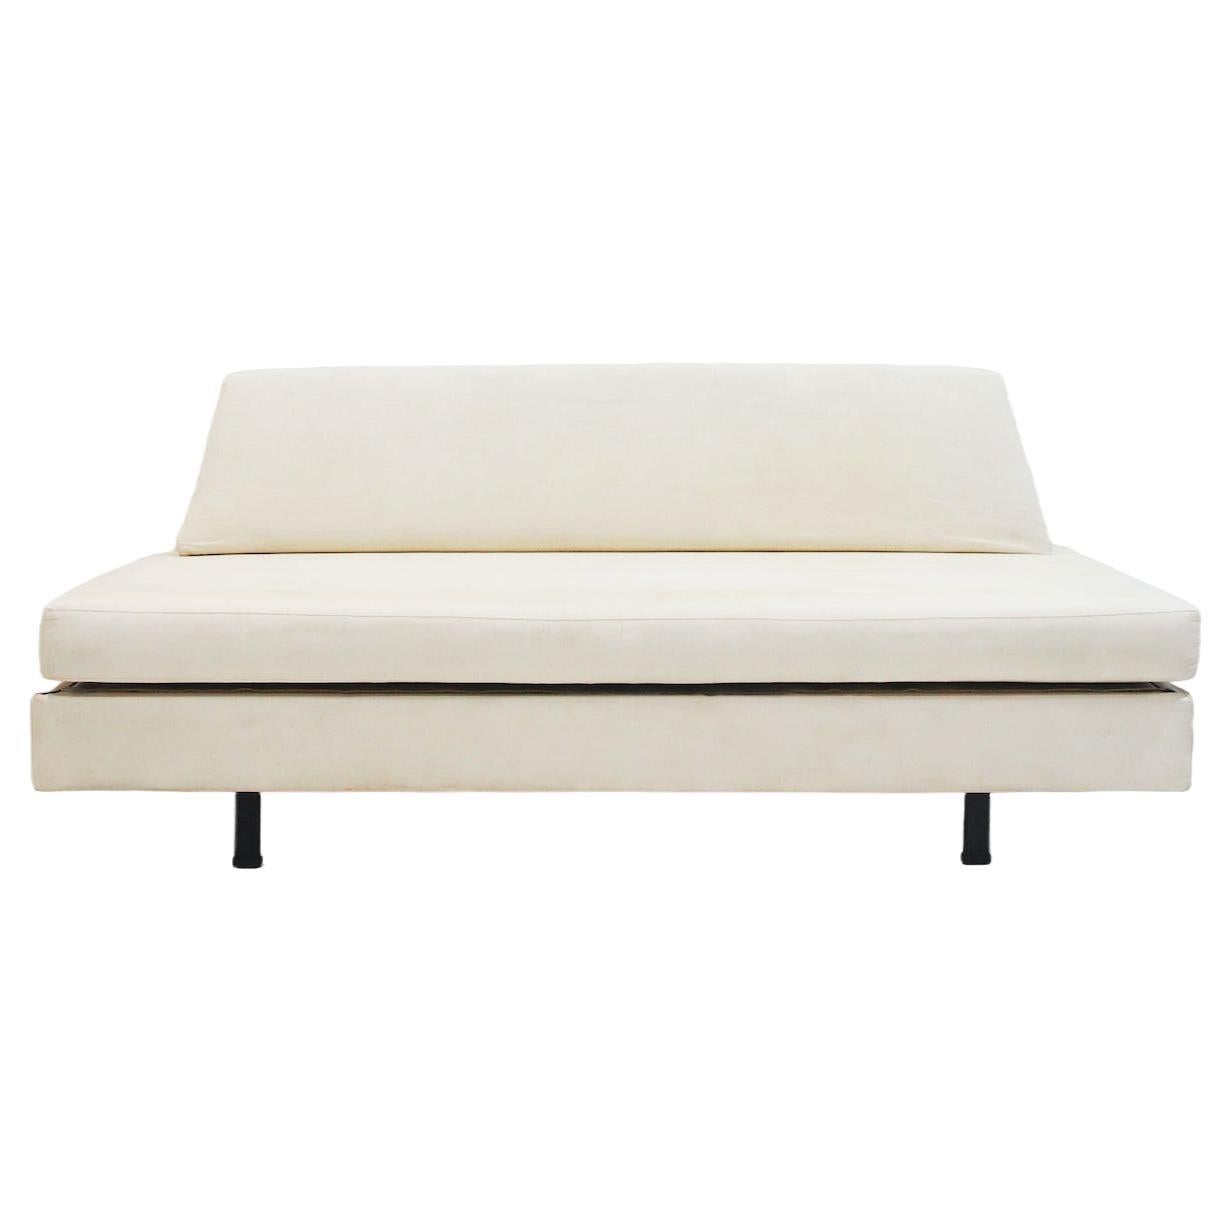 Italian Modernist Daybed with White Upholstery and Iron Frame For Sale